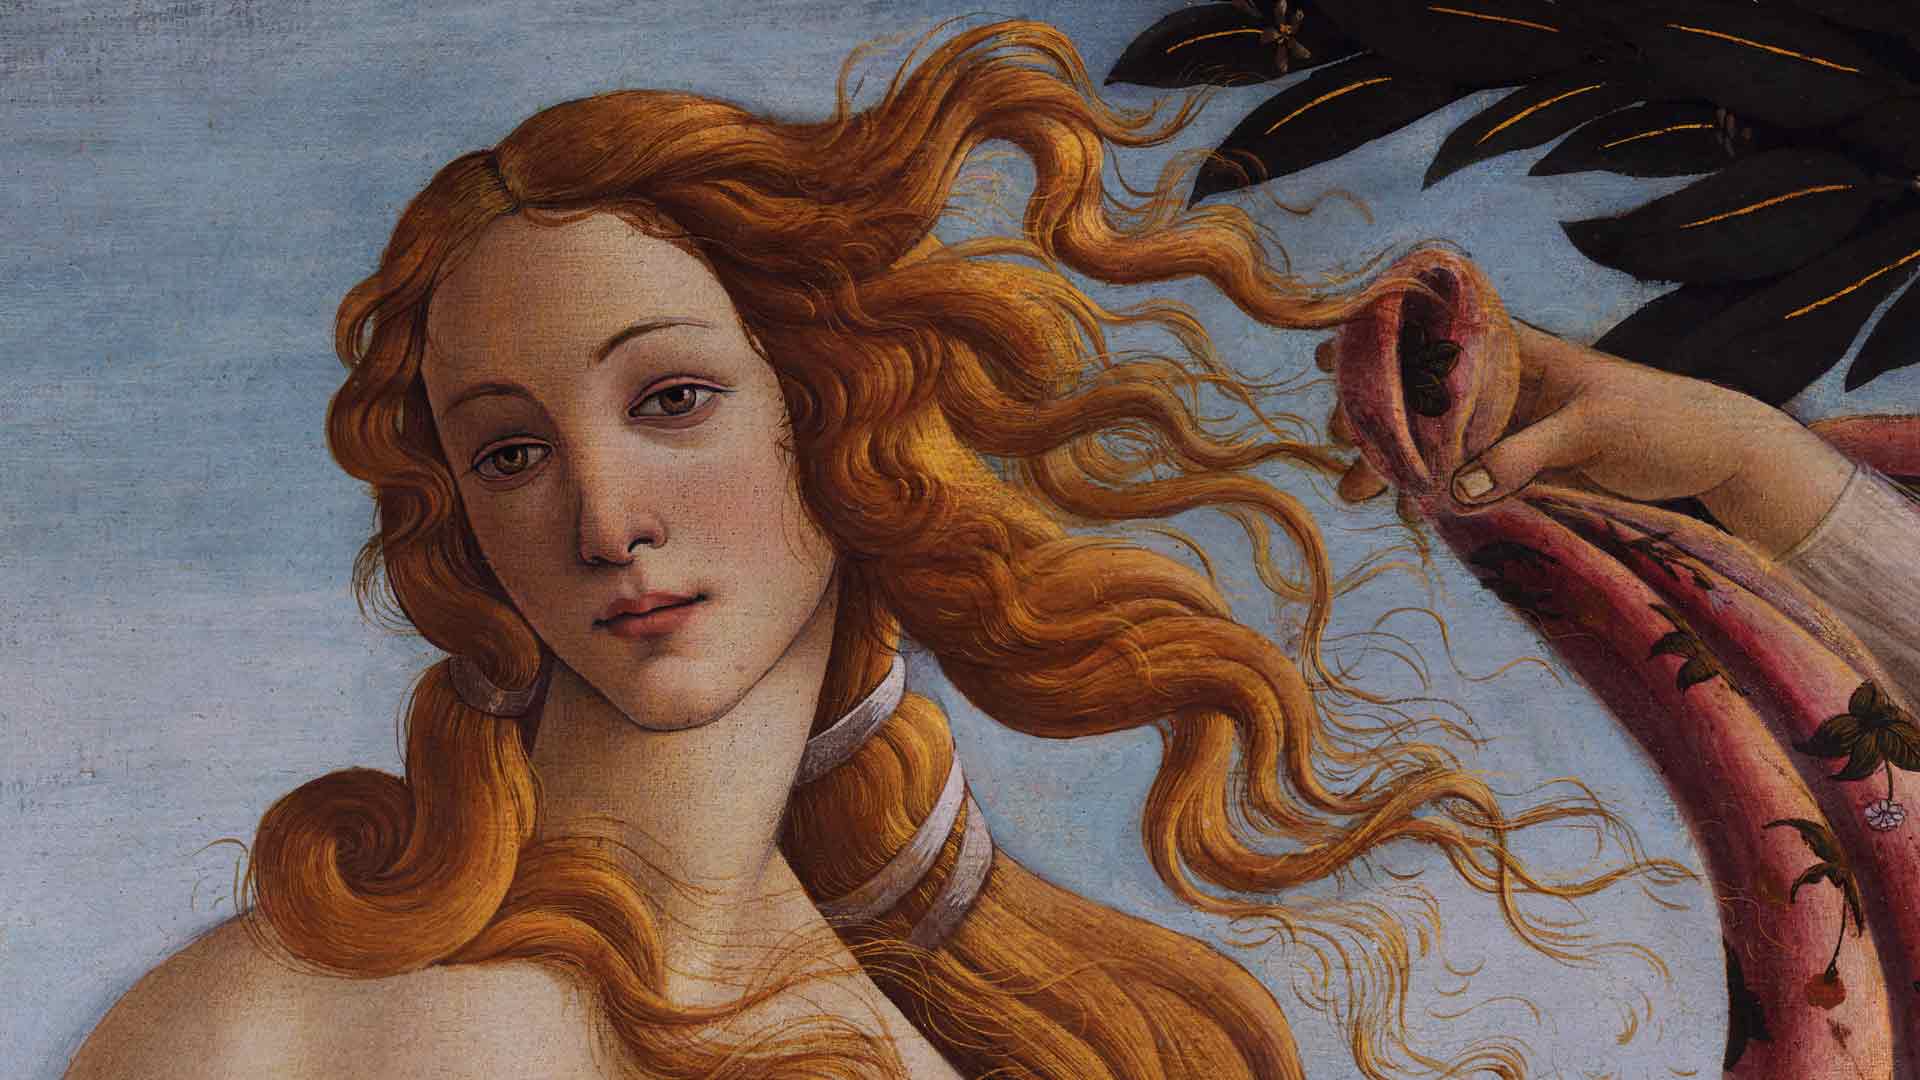 Detail of Venus in The Birth of Venus by Sandro Botticelli at the Uffizi Gallery, Florence, Italy (CC0 1.0)